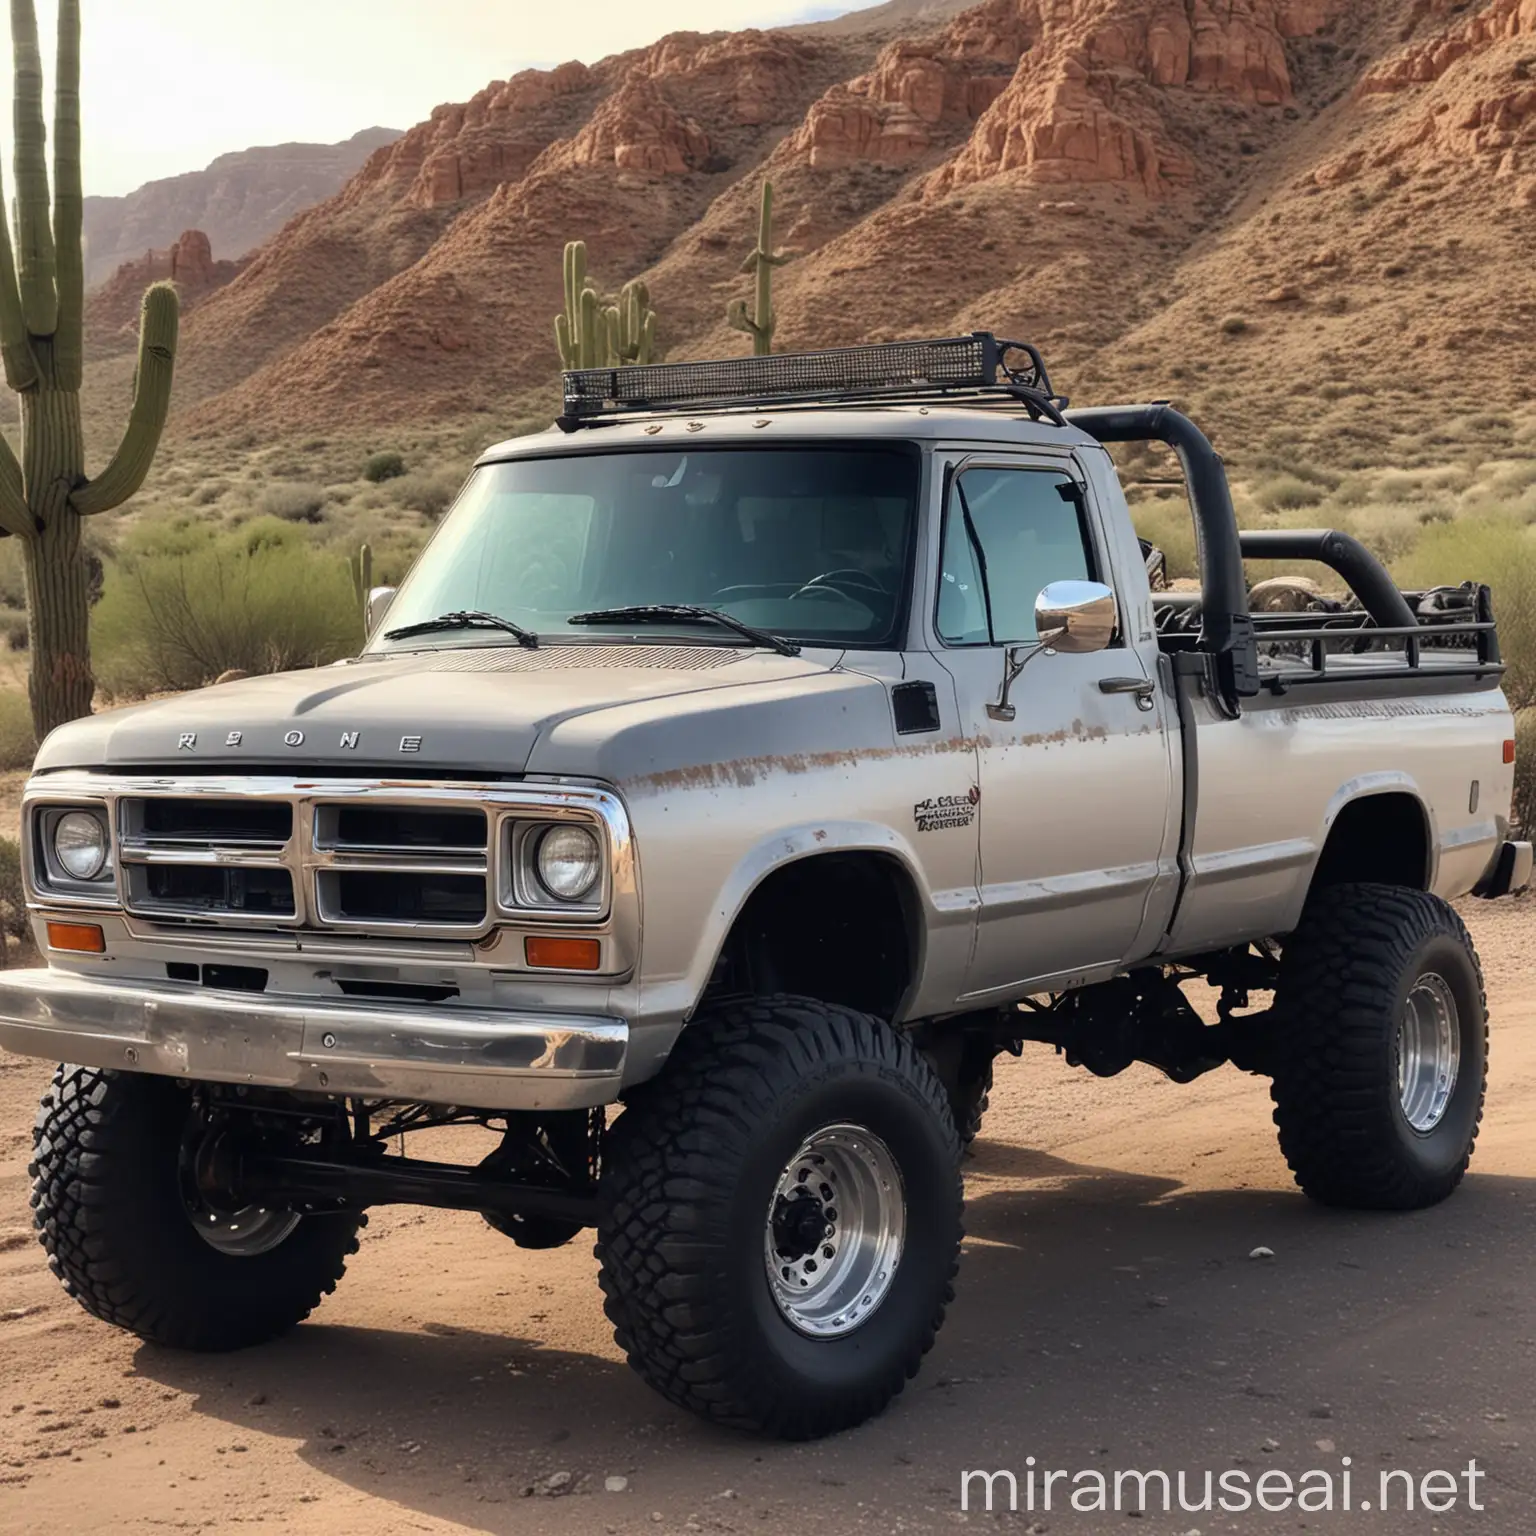 93 dodge extended cab w250 4x4 lifted big tires in arizona desert